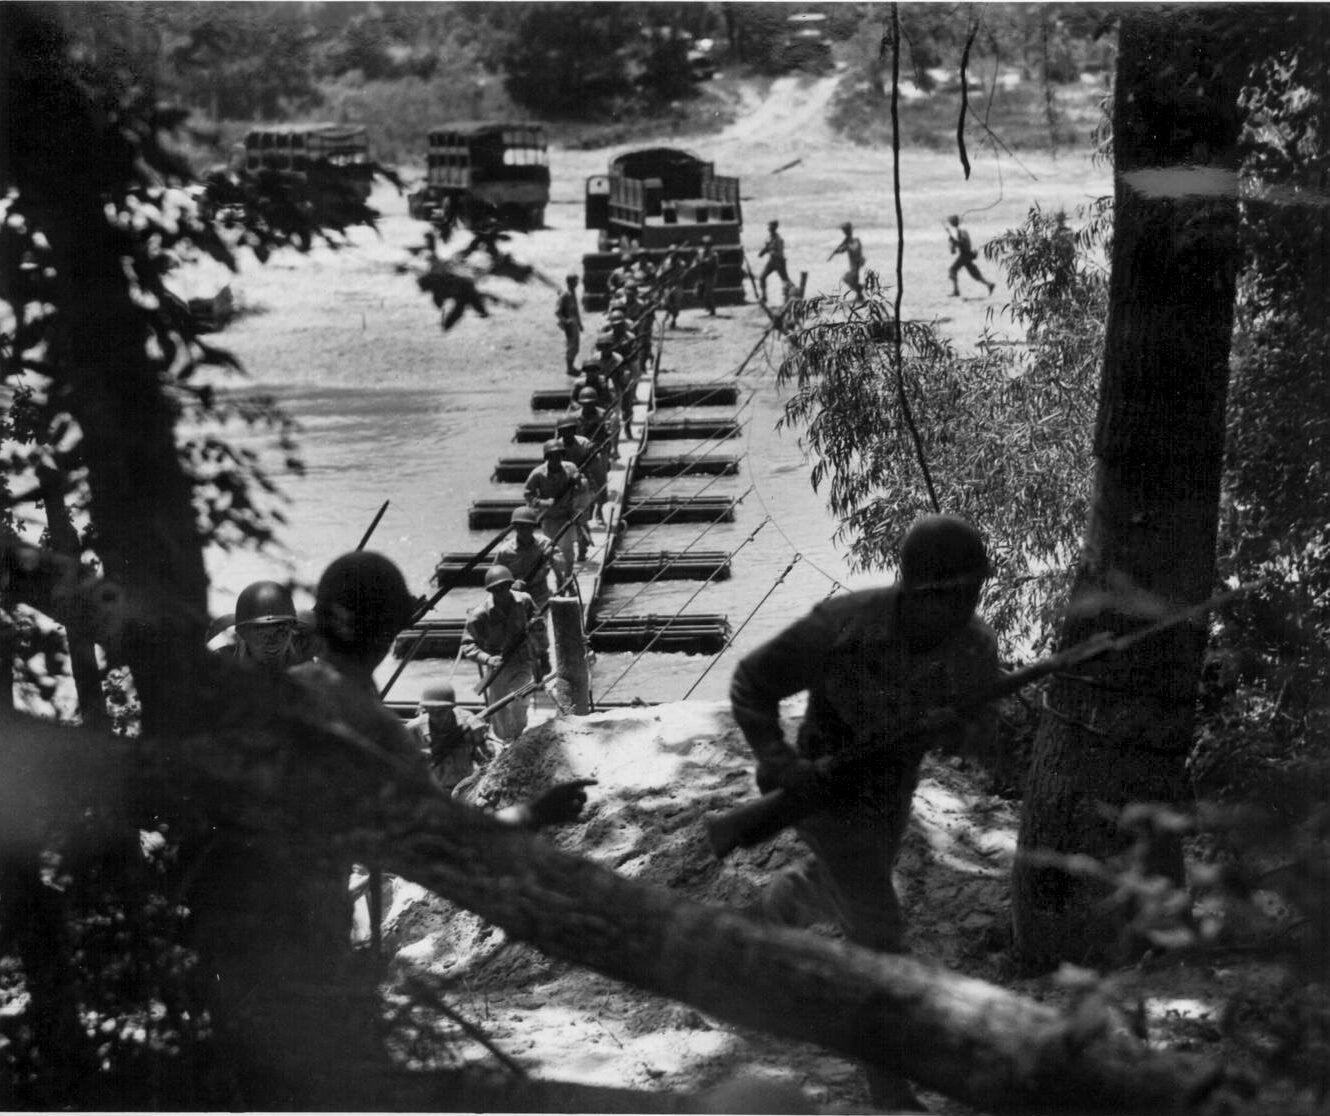 Members of the 442nd RCT rush across a pontoon bridge built by the 232nd Engineer Company at Camp Shelby, July 1943.